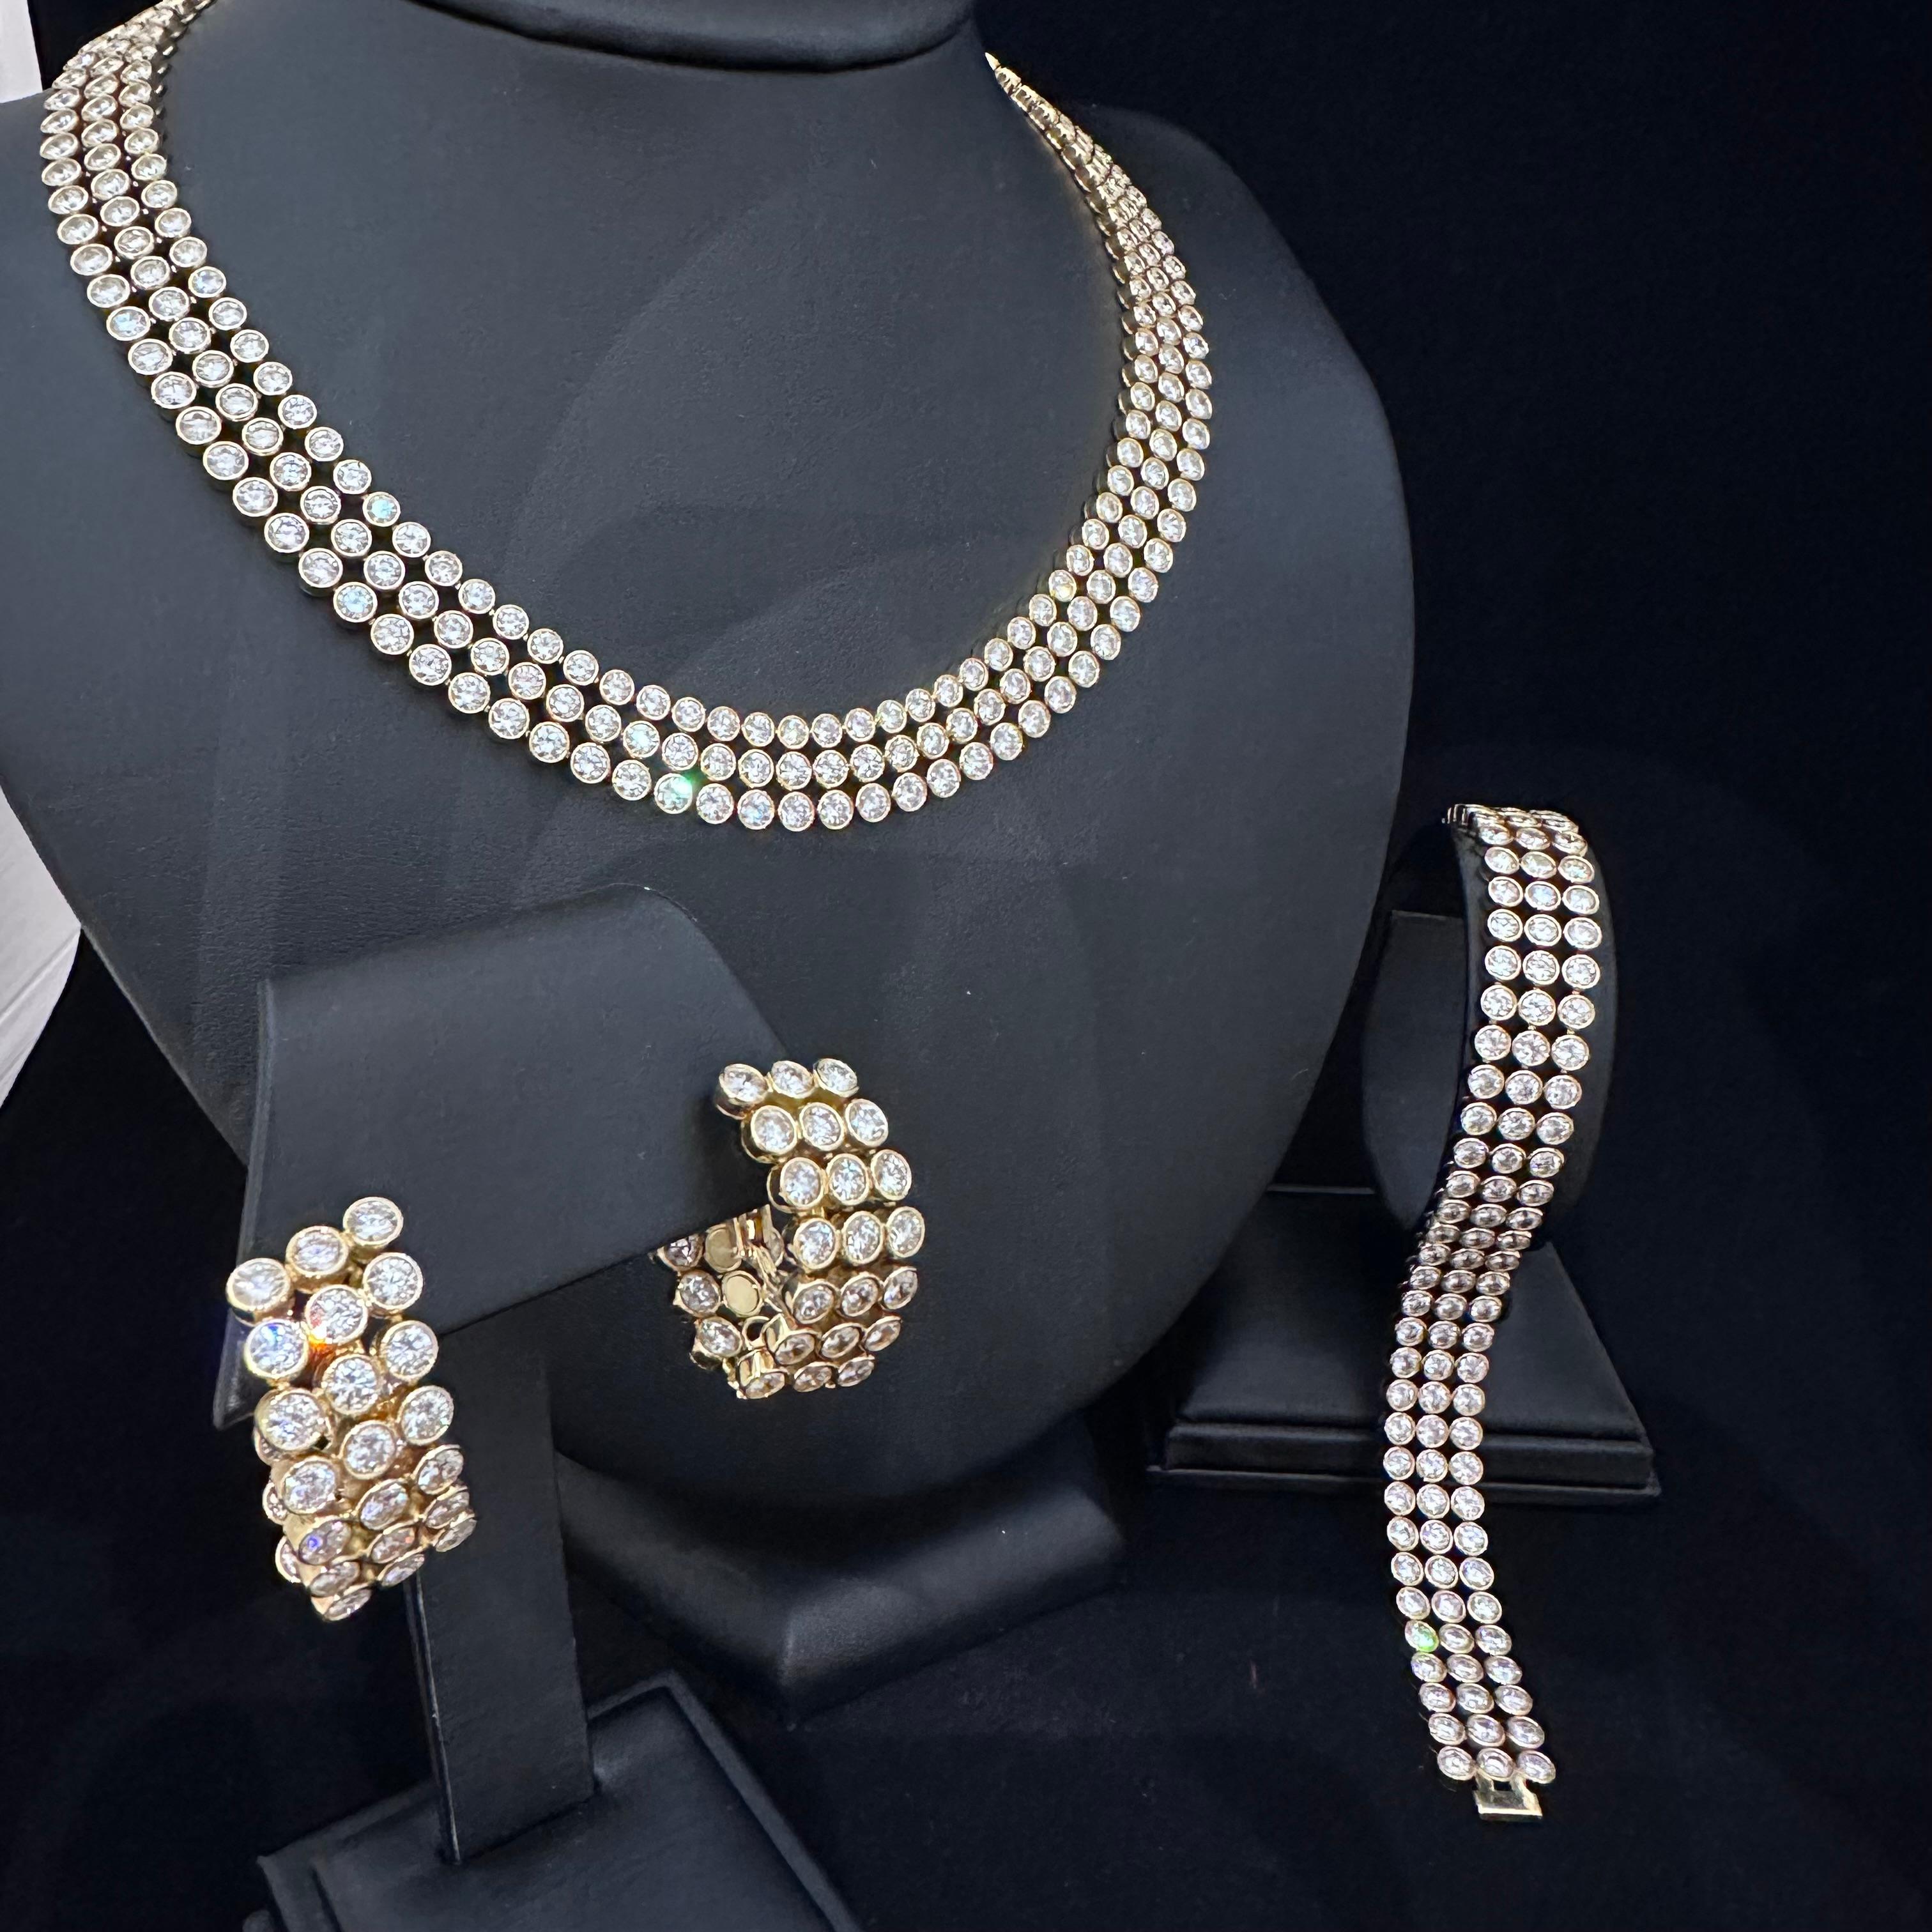 Harry Winston Diamond Necklace Bracelet & Earrings Set 18k Yellow Gold In Excellent Condition For Sale In Beverly Hills, CA